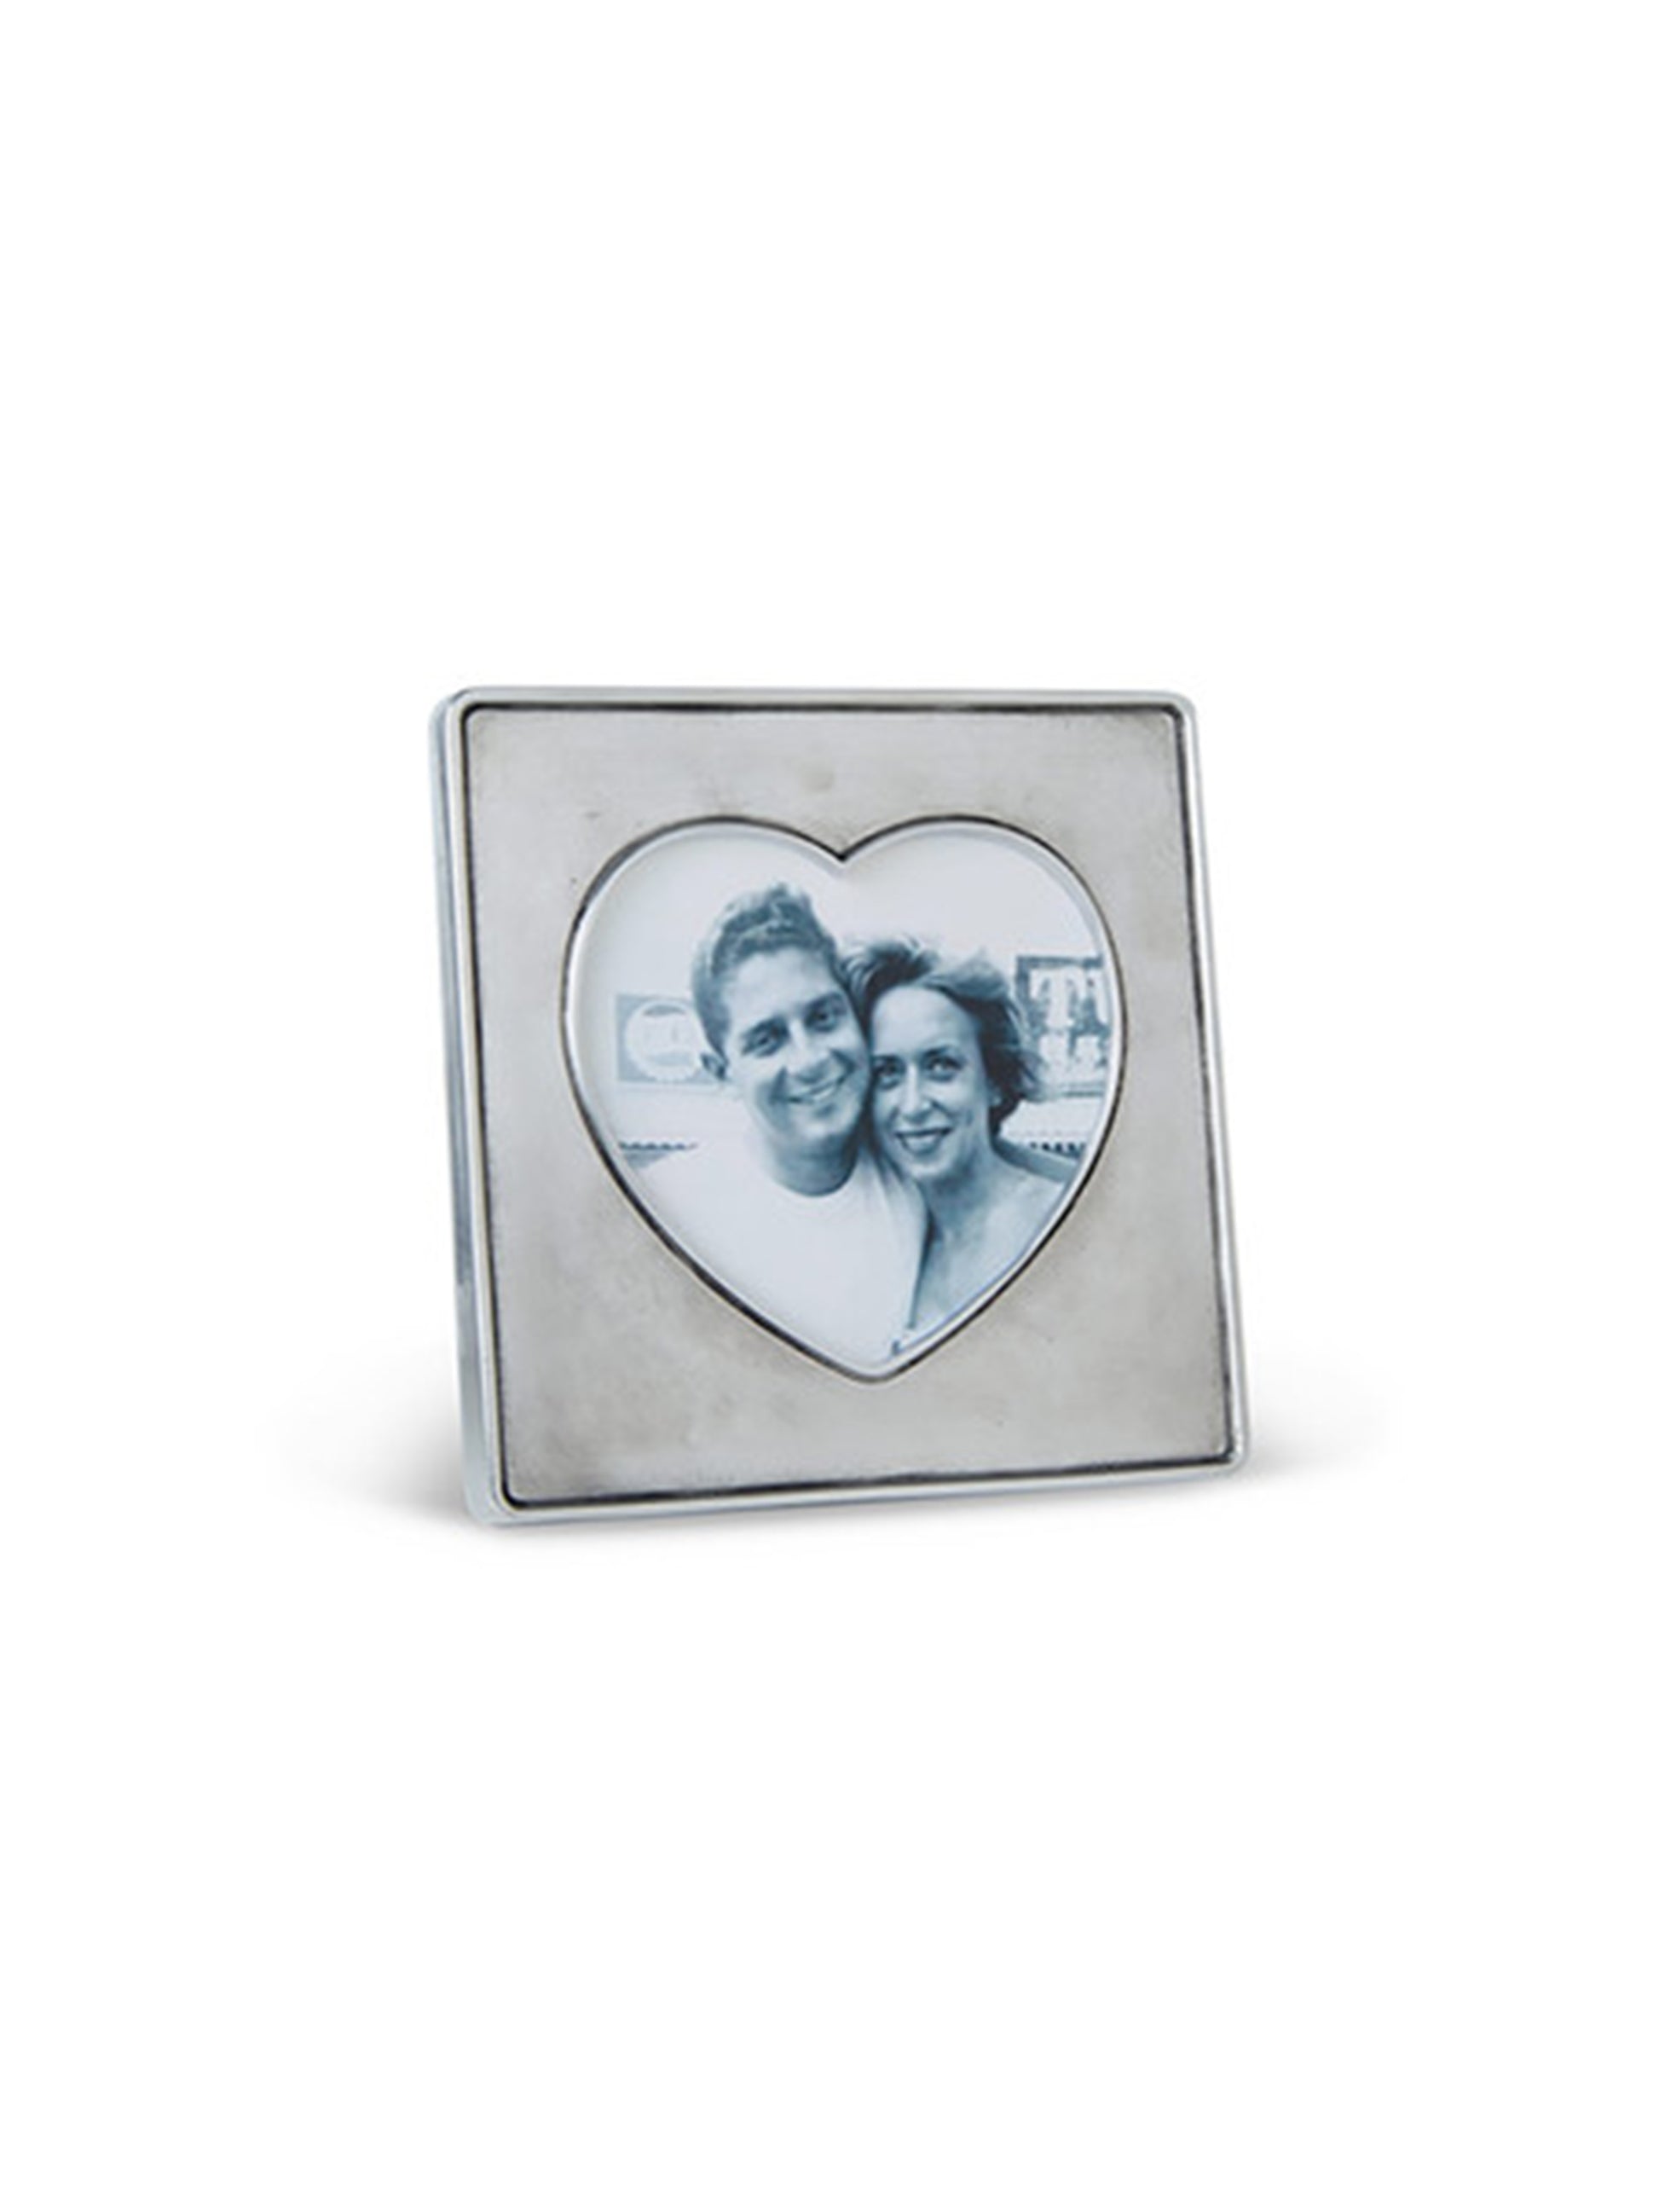 MATCH Pewter Heart in Square Frame Weston Table